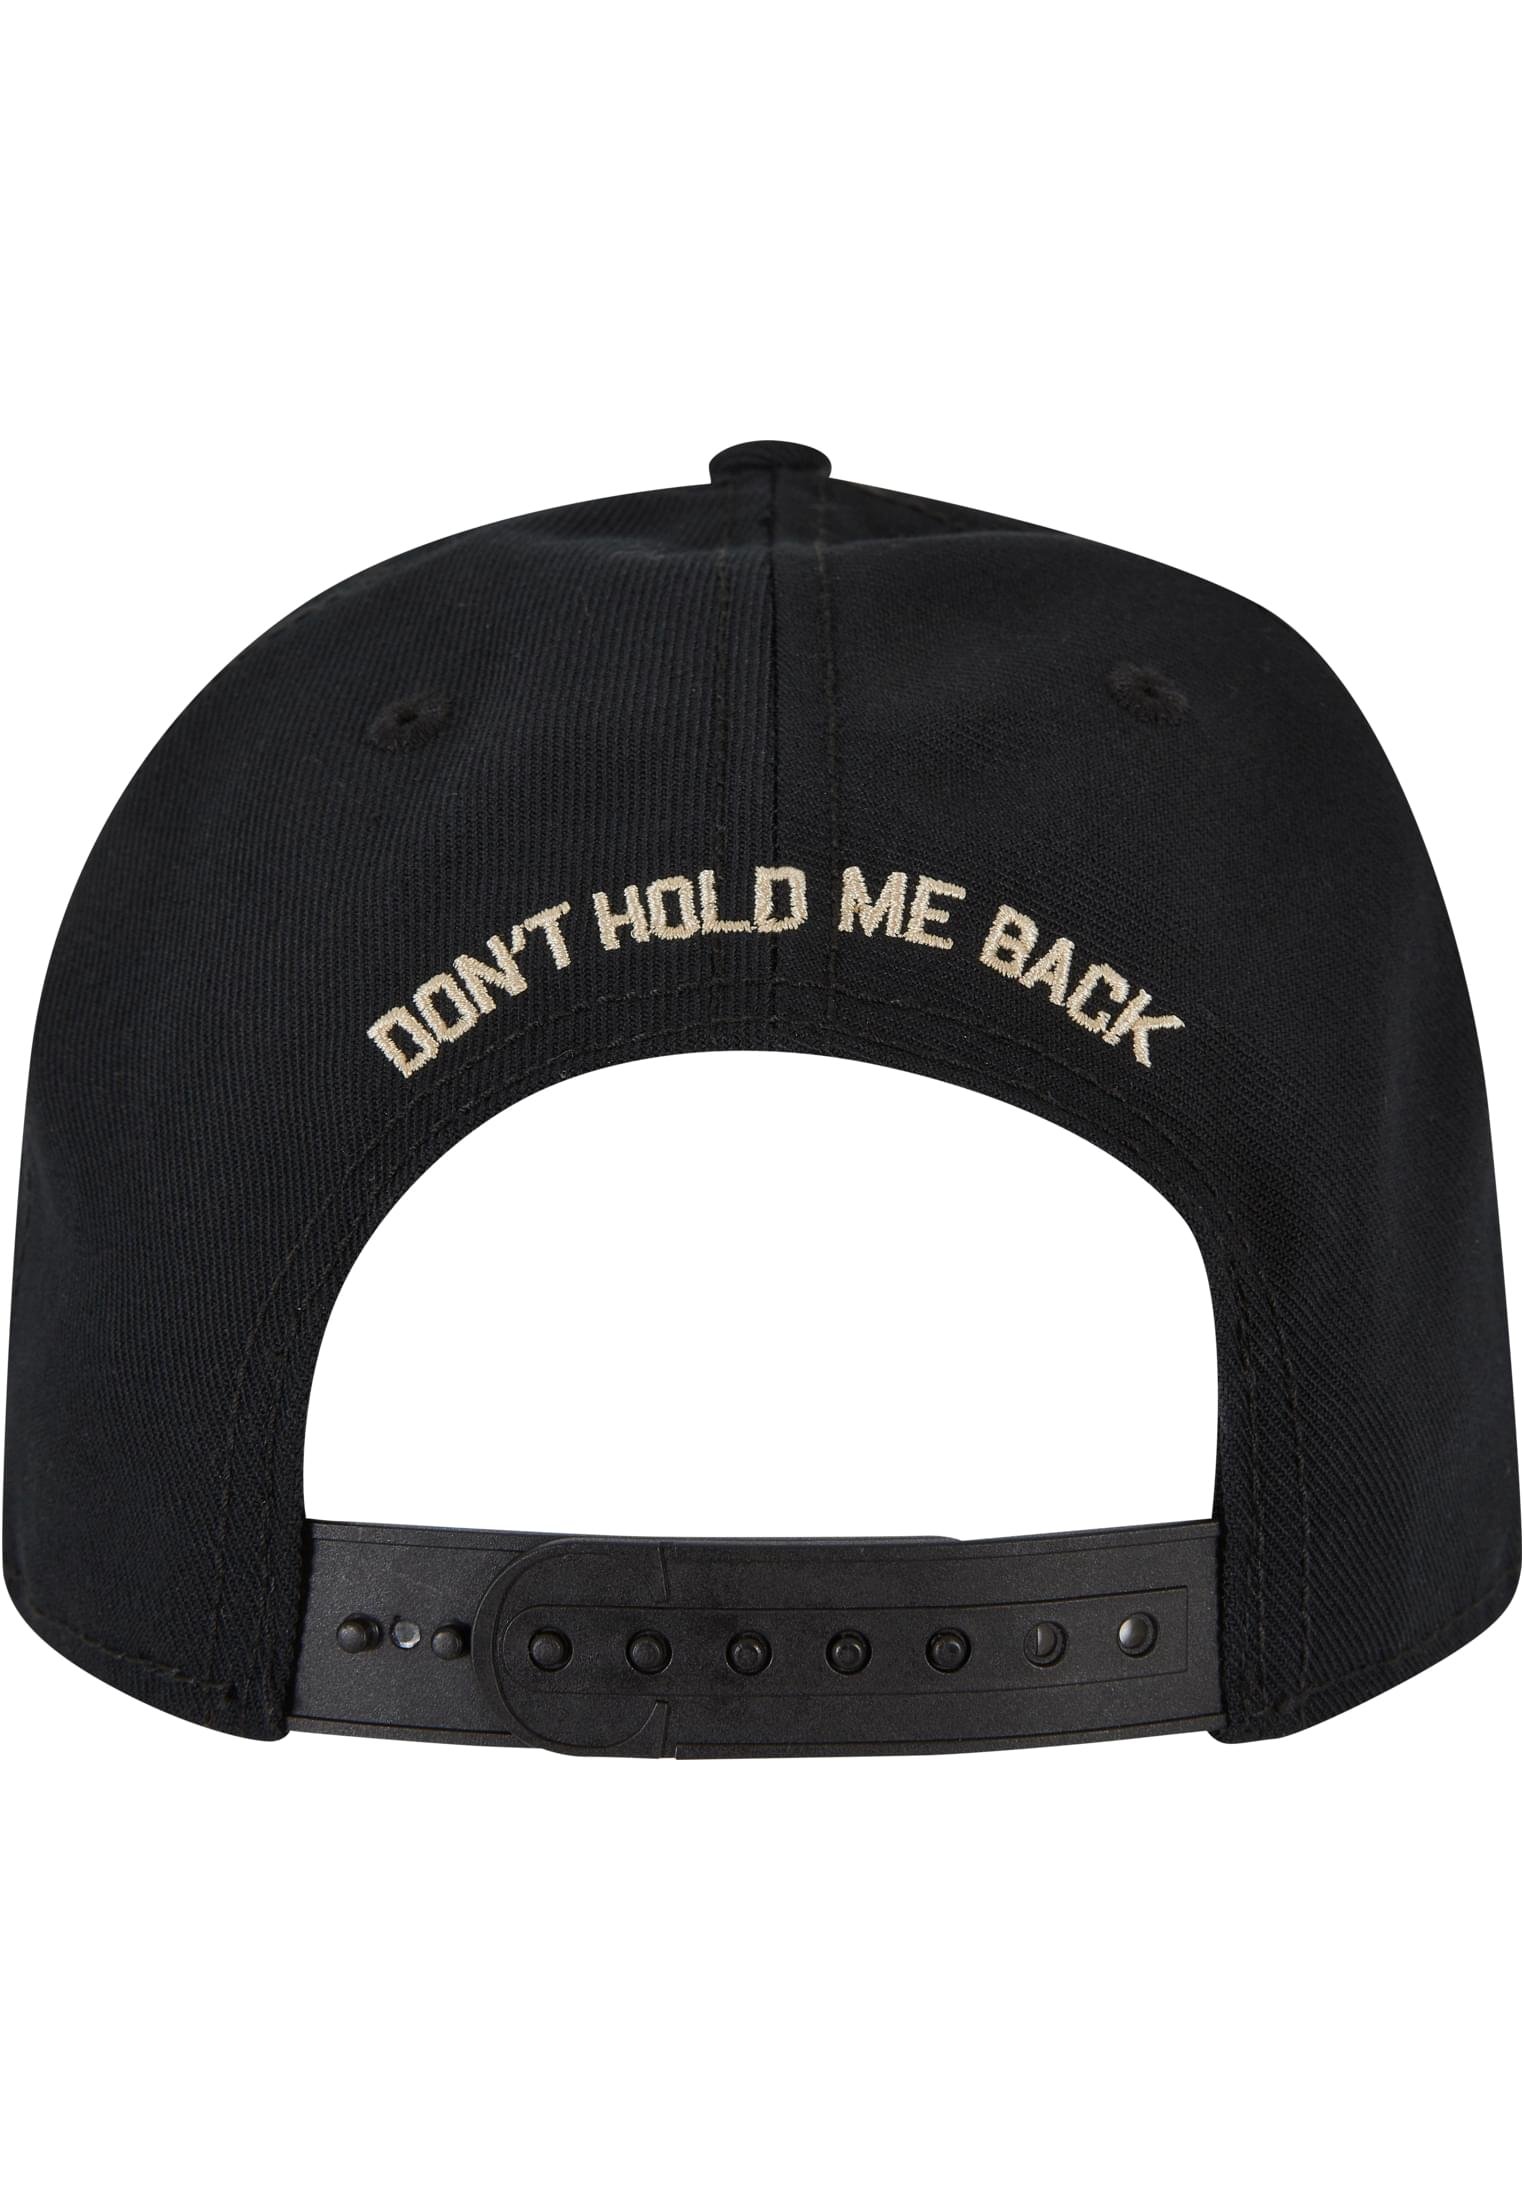 Don't Hold Me P Cap black one size